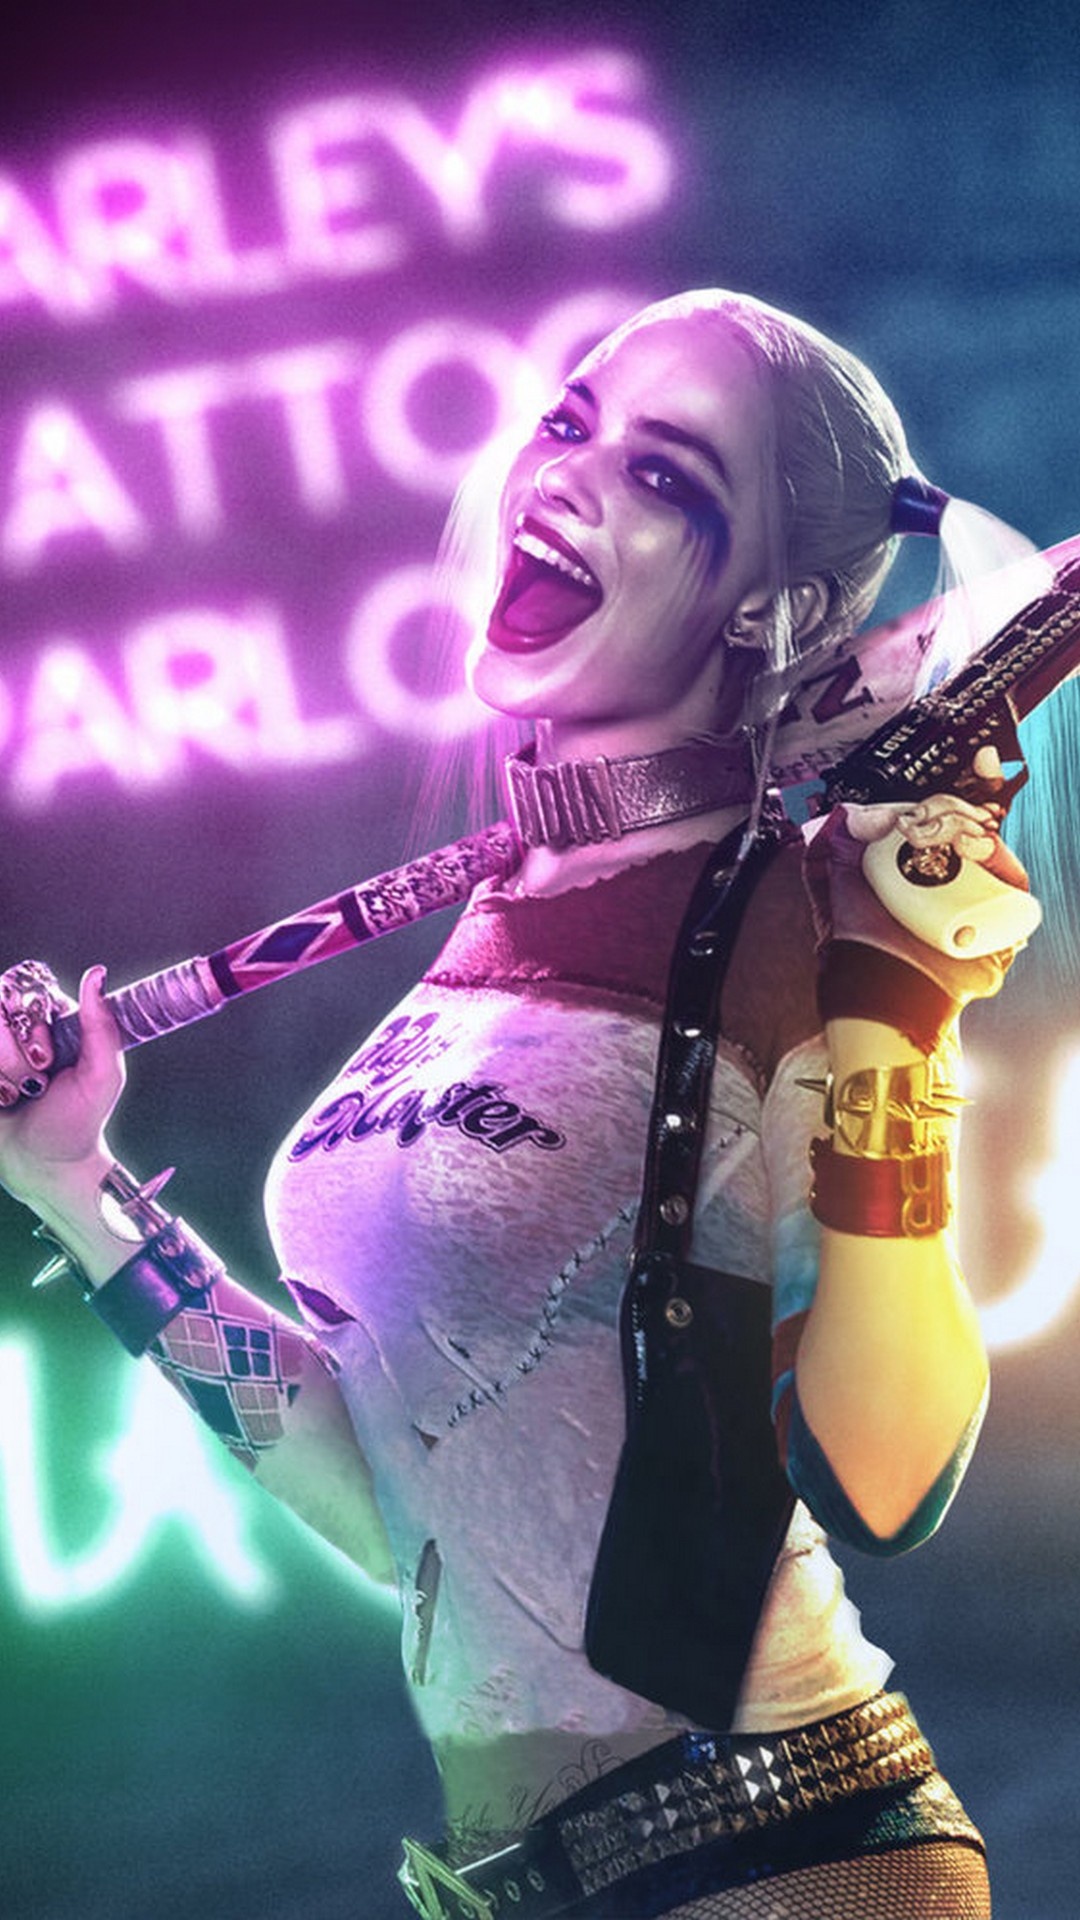 Captivating Harley Quinn, Fiery personality, Unpredictable villain, Iconic movie character, 1080x1920 Full HD Phone